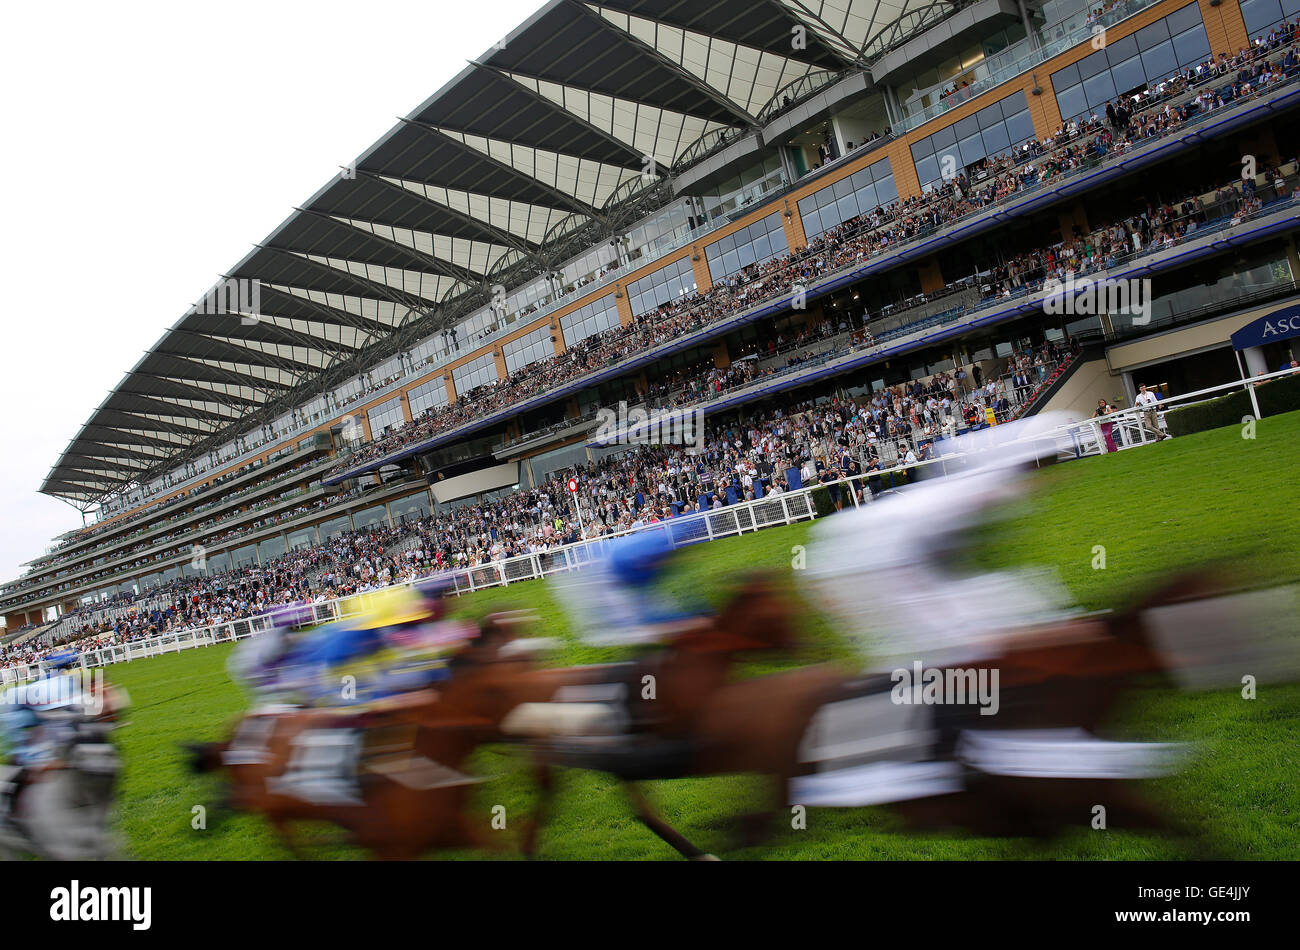 Runners pass the stands for the first time during The John Guest Brown Jack Stakes Race run on day one of the King George VI Weekend at Ascot Racecourse. PRESS ASSCOCIATION Photo. Picture date: Friday July 22, 2016. See PA story Racing Ascot. Photo credit should read: Julian Herbert/PA Wire. RESTRICTIONS: Use subject to restrictions. Editorial use only, no commercial or promotional use. No private sales. Call +44 (0)1158 447447 for further information. Stock Photo